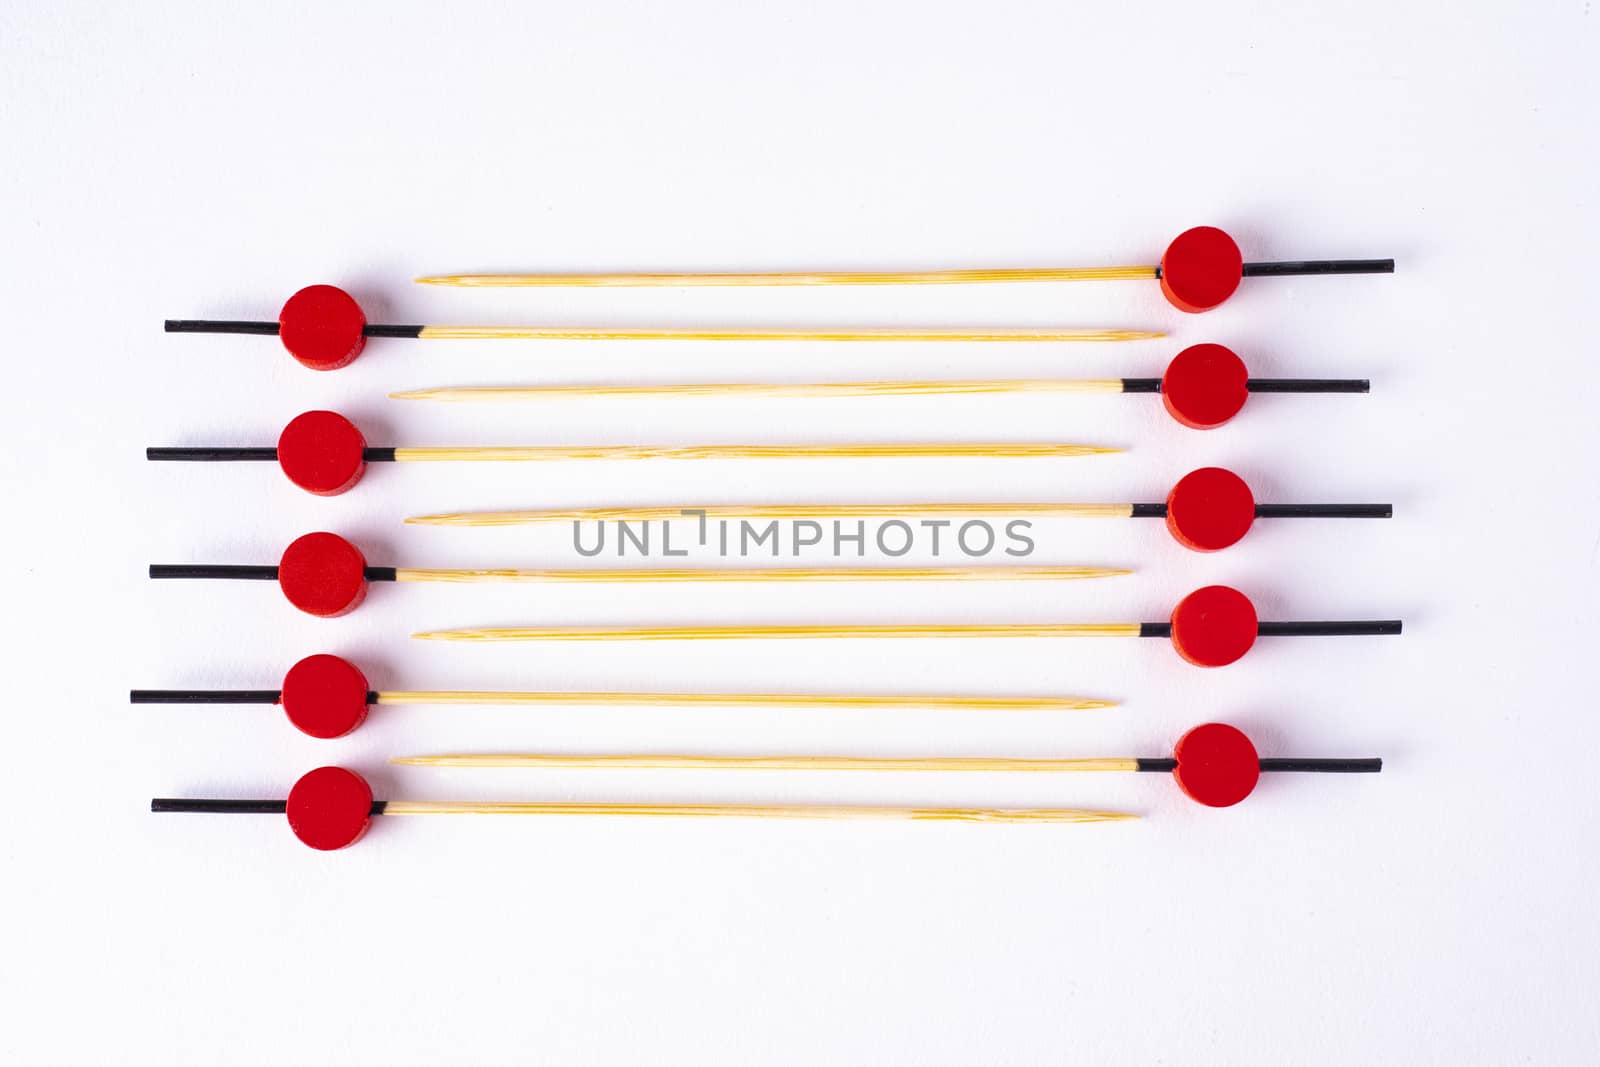 Ladder of colorful food skewers on white background.